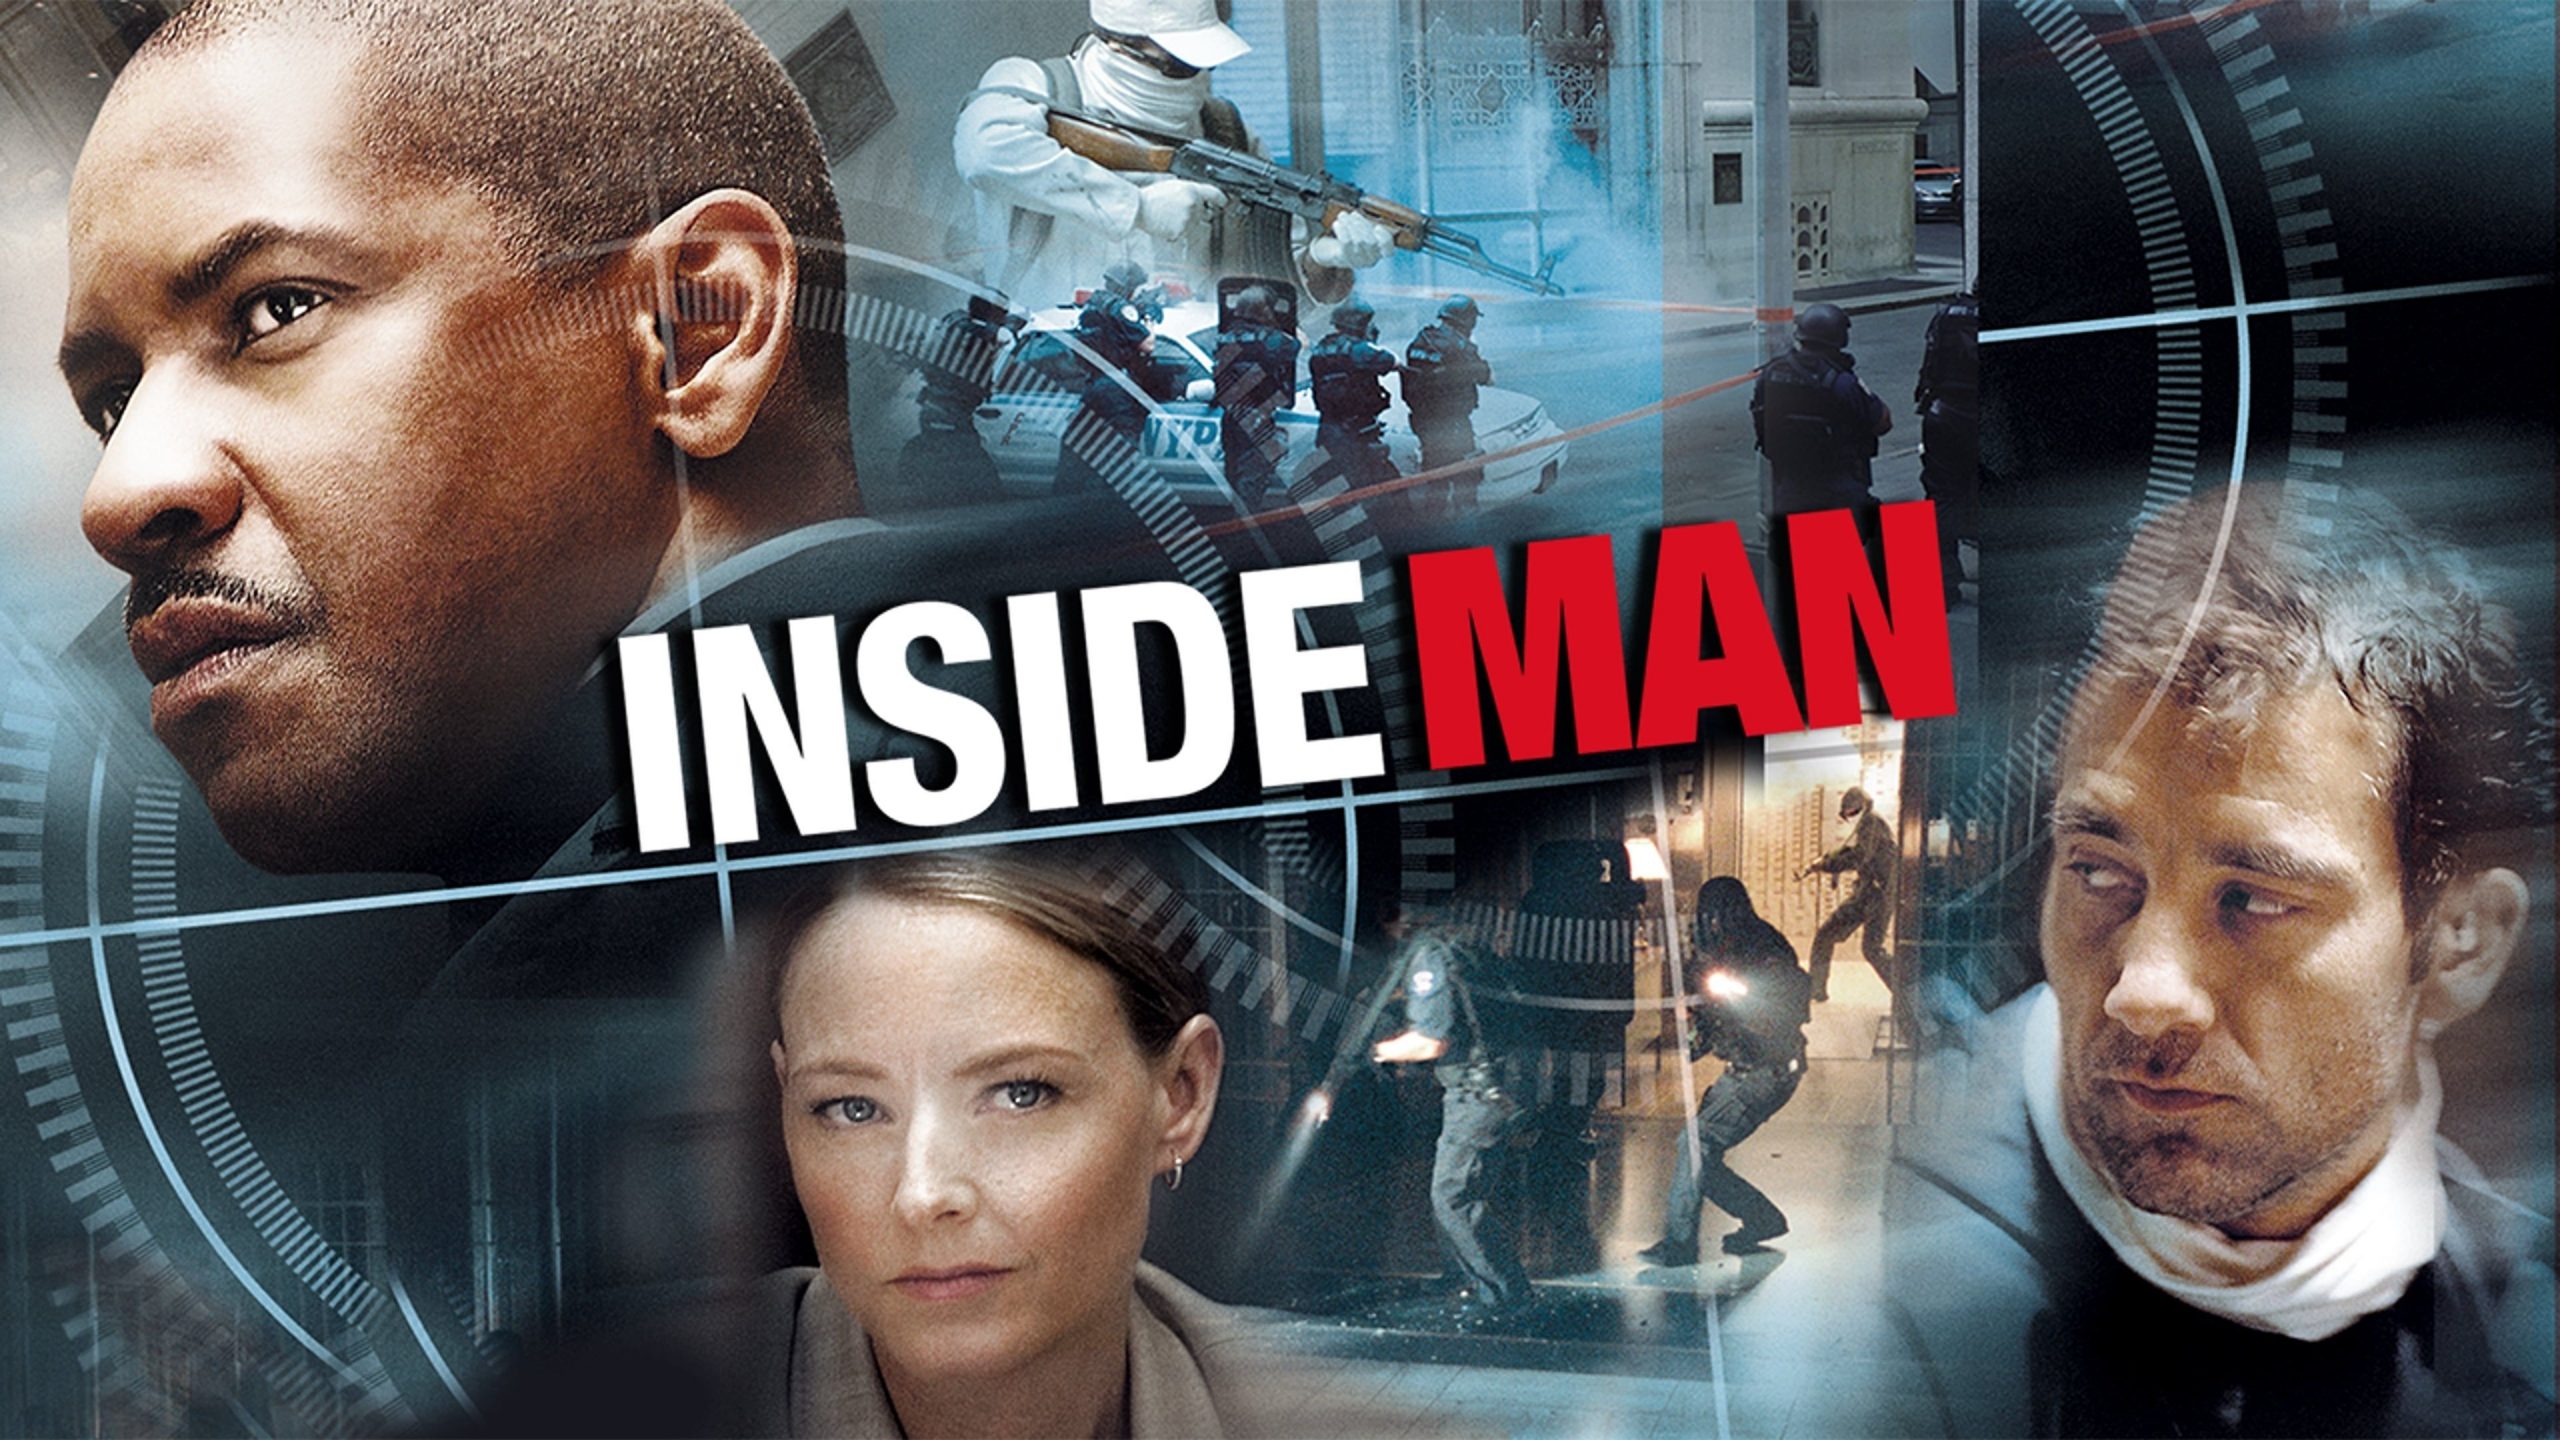 Hollywood Movie Inside Man Plot Summary Reviews Actors Quotes 2006